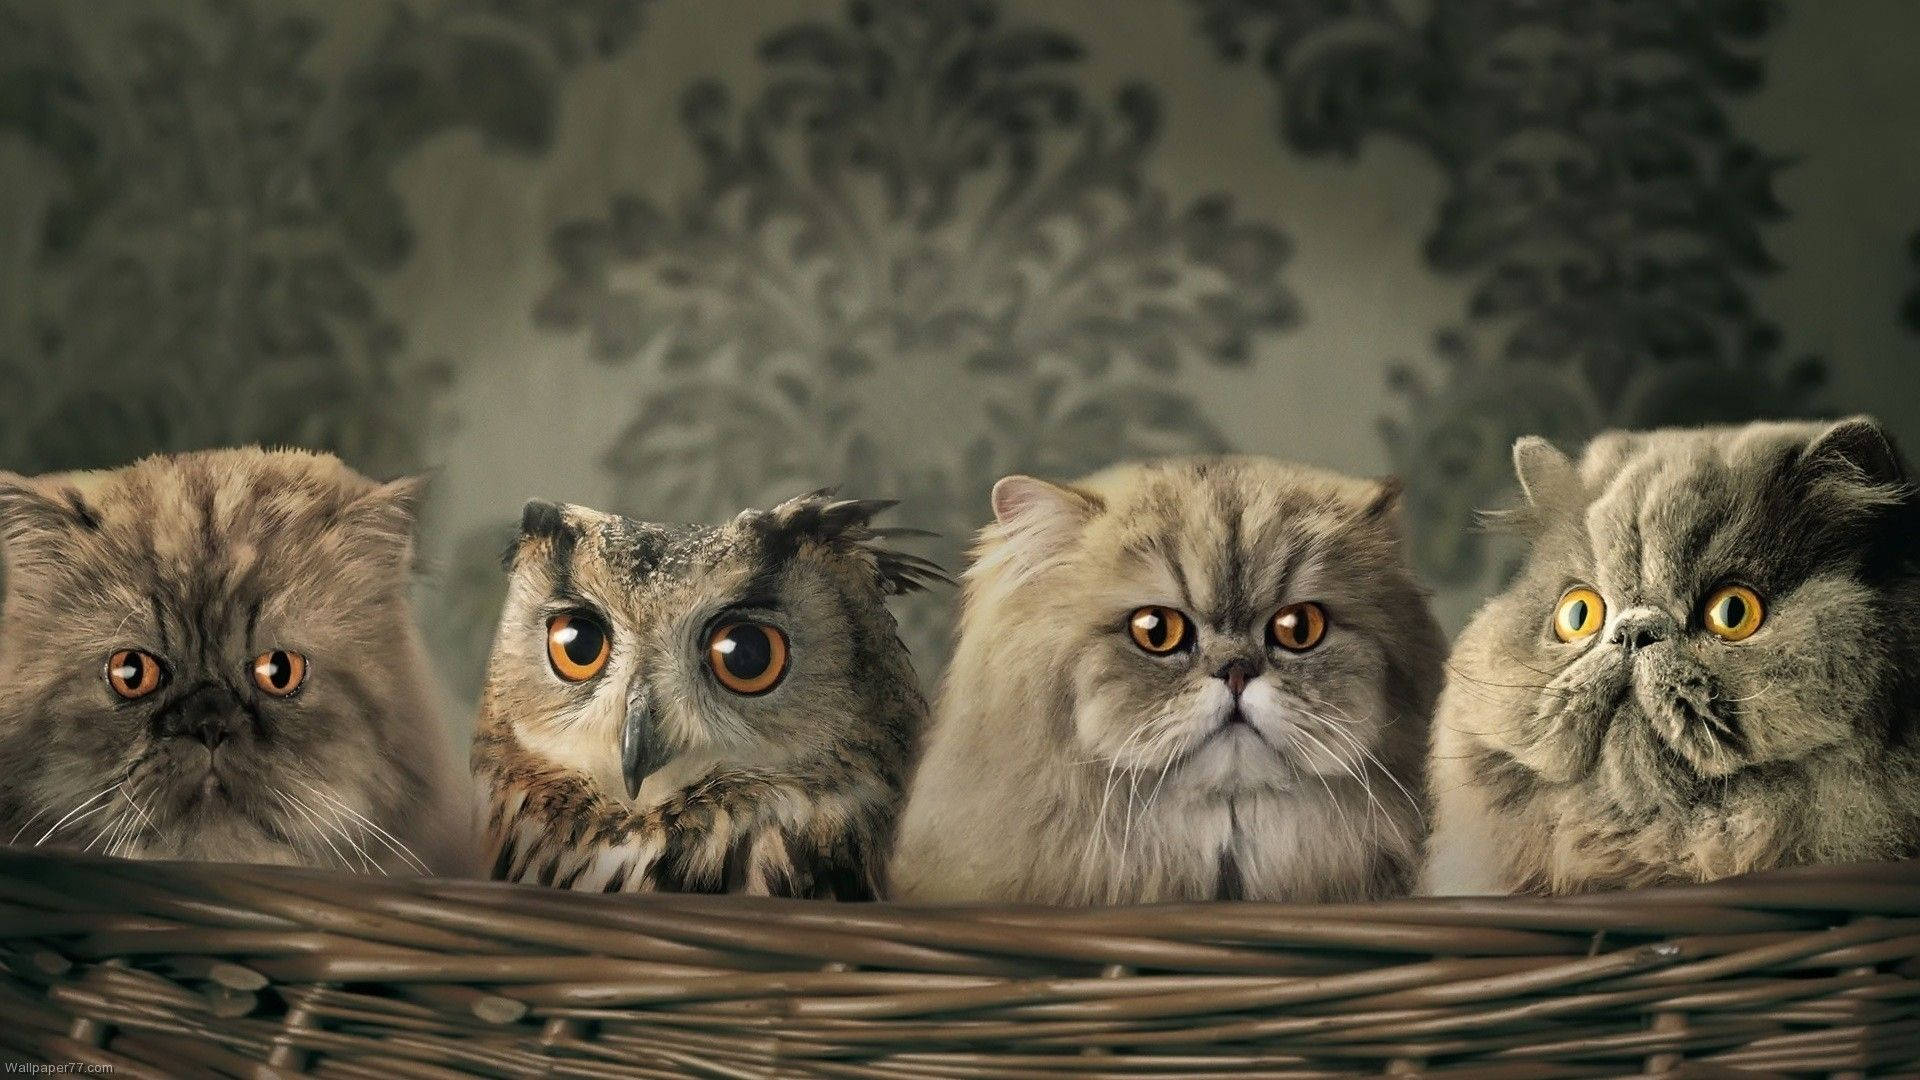 Baby Owl With Cats Background